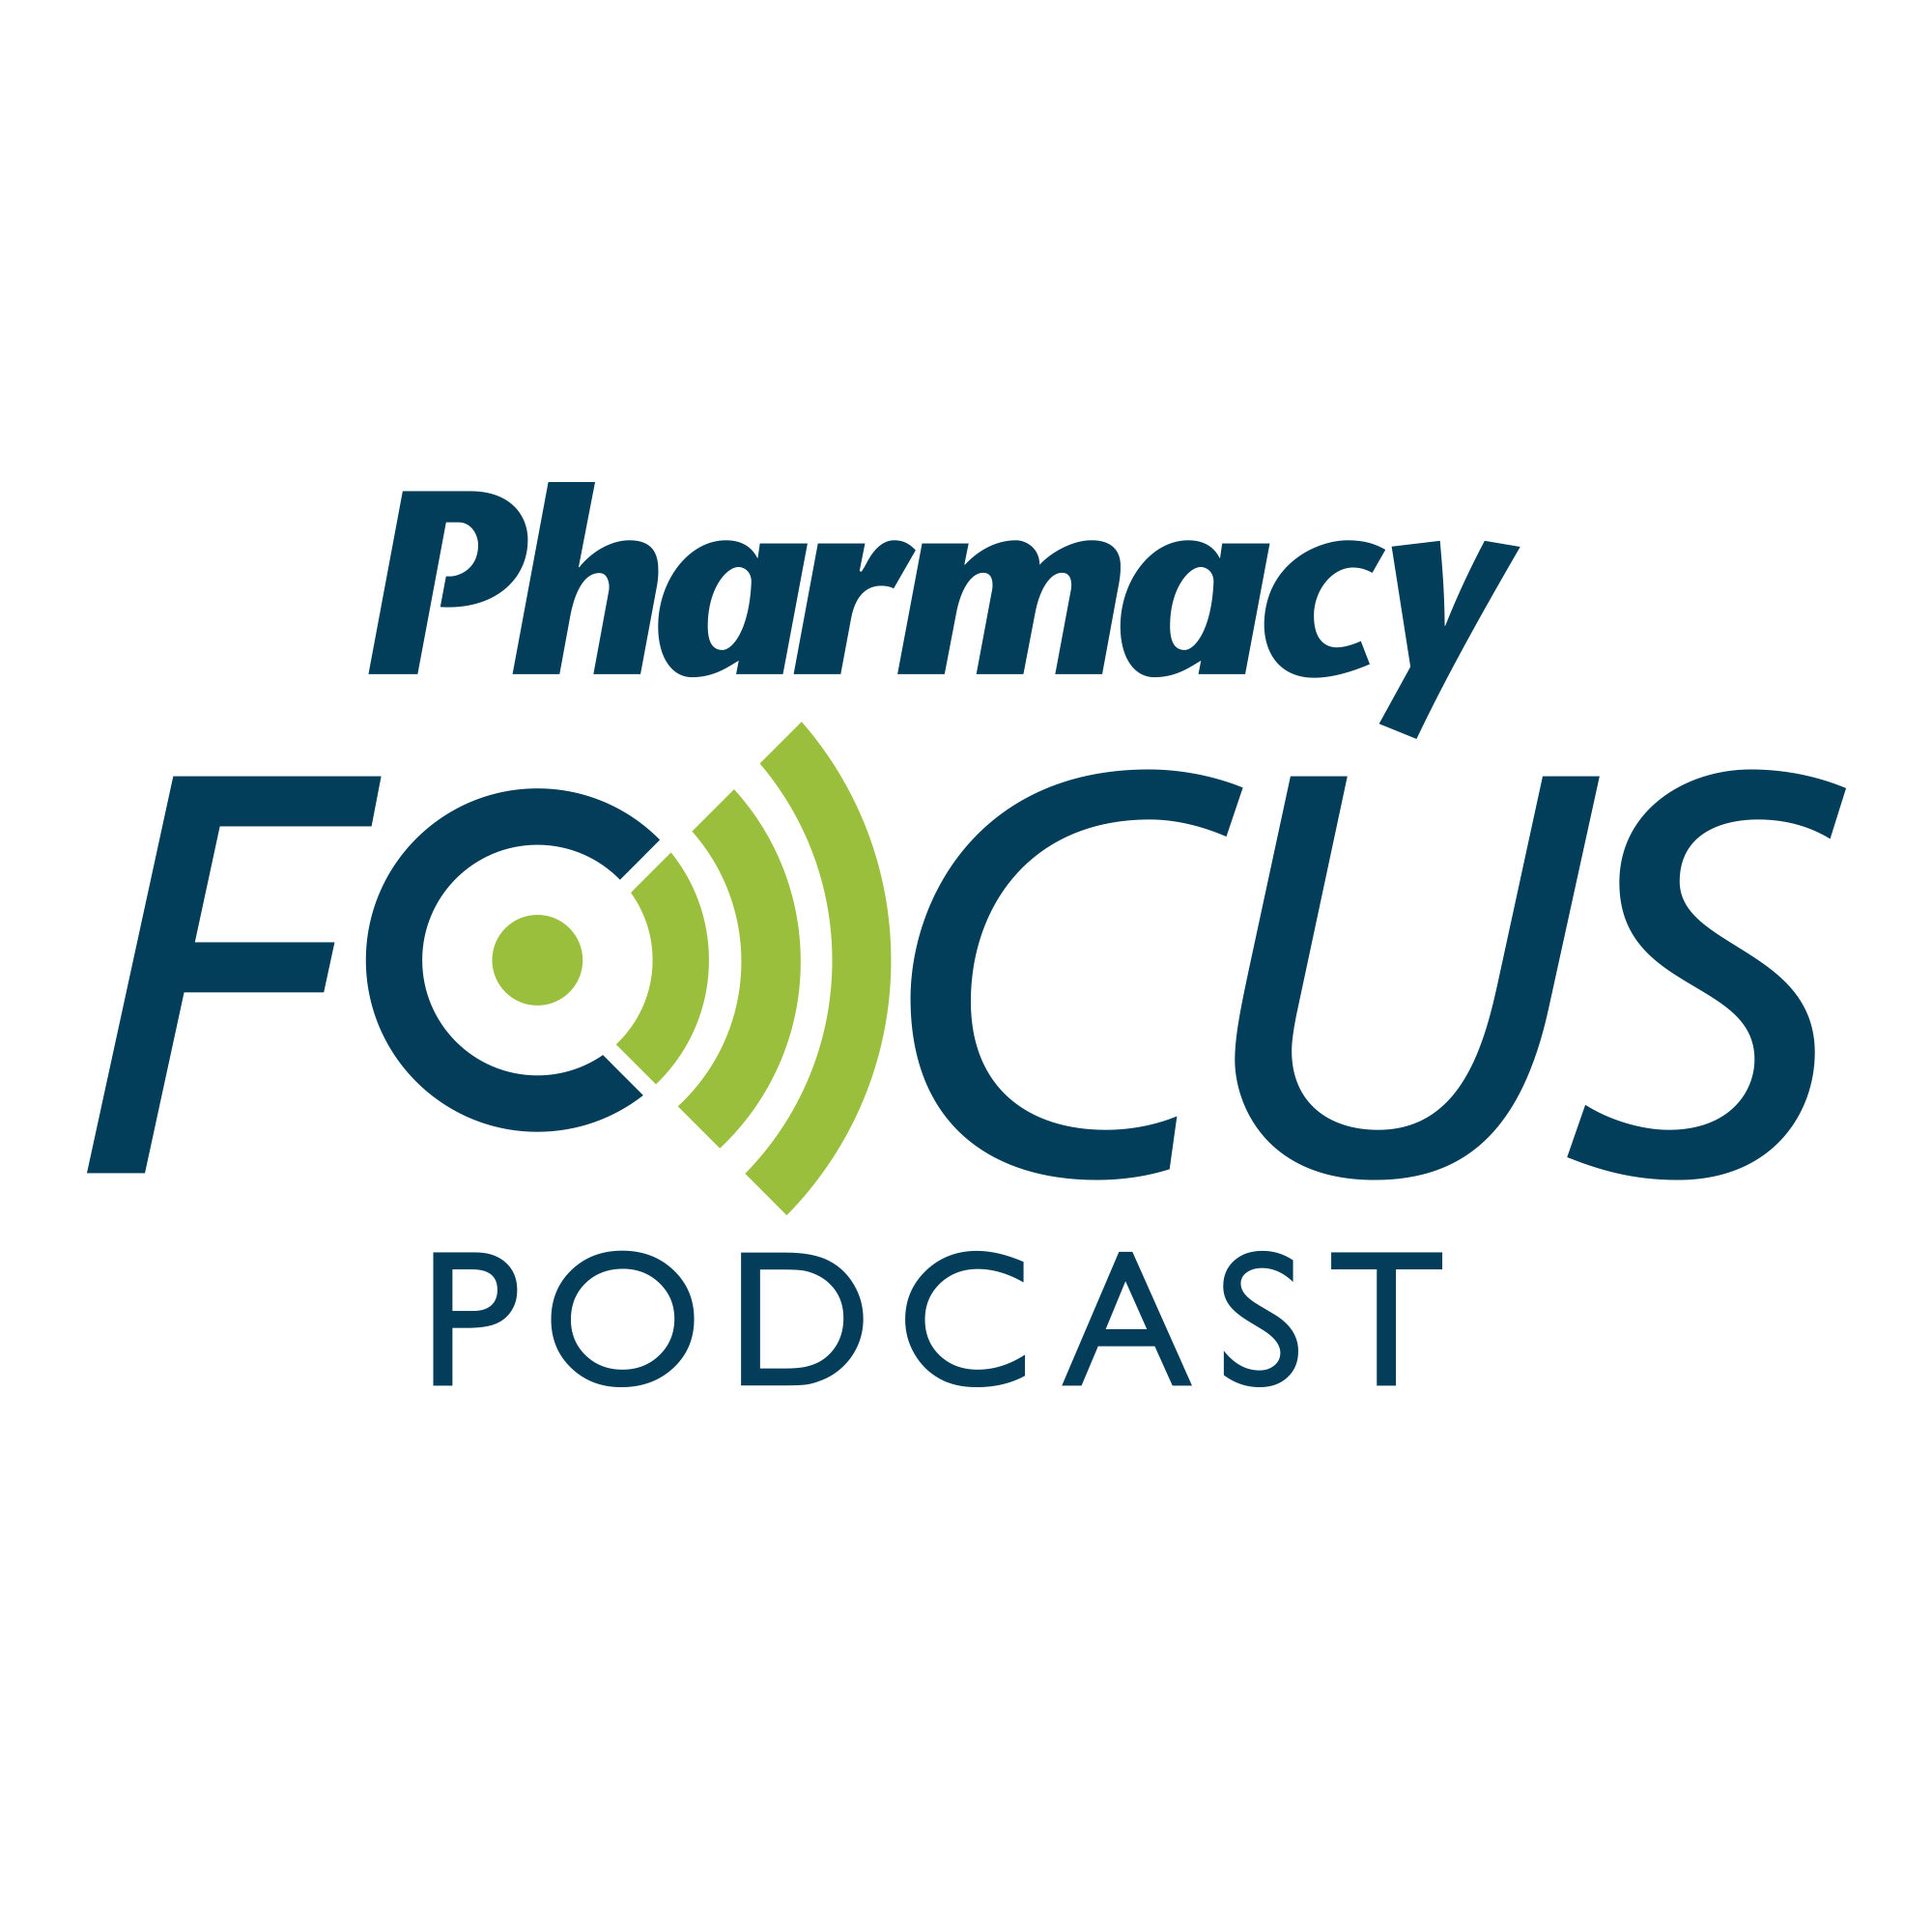 Pharmacy Focus Episode 38: The Revolutionary Impact of Dupilumab on Skin Conditions